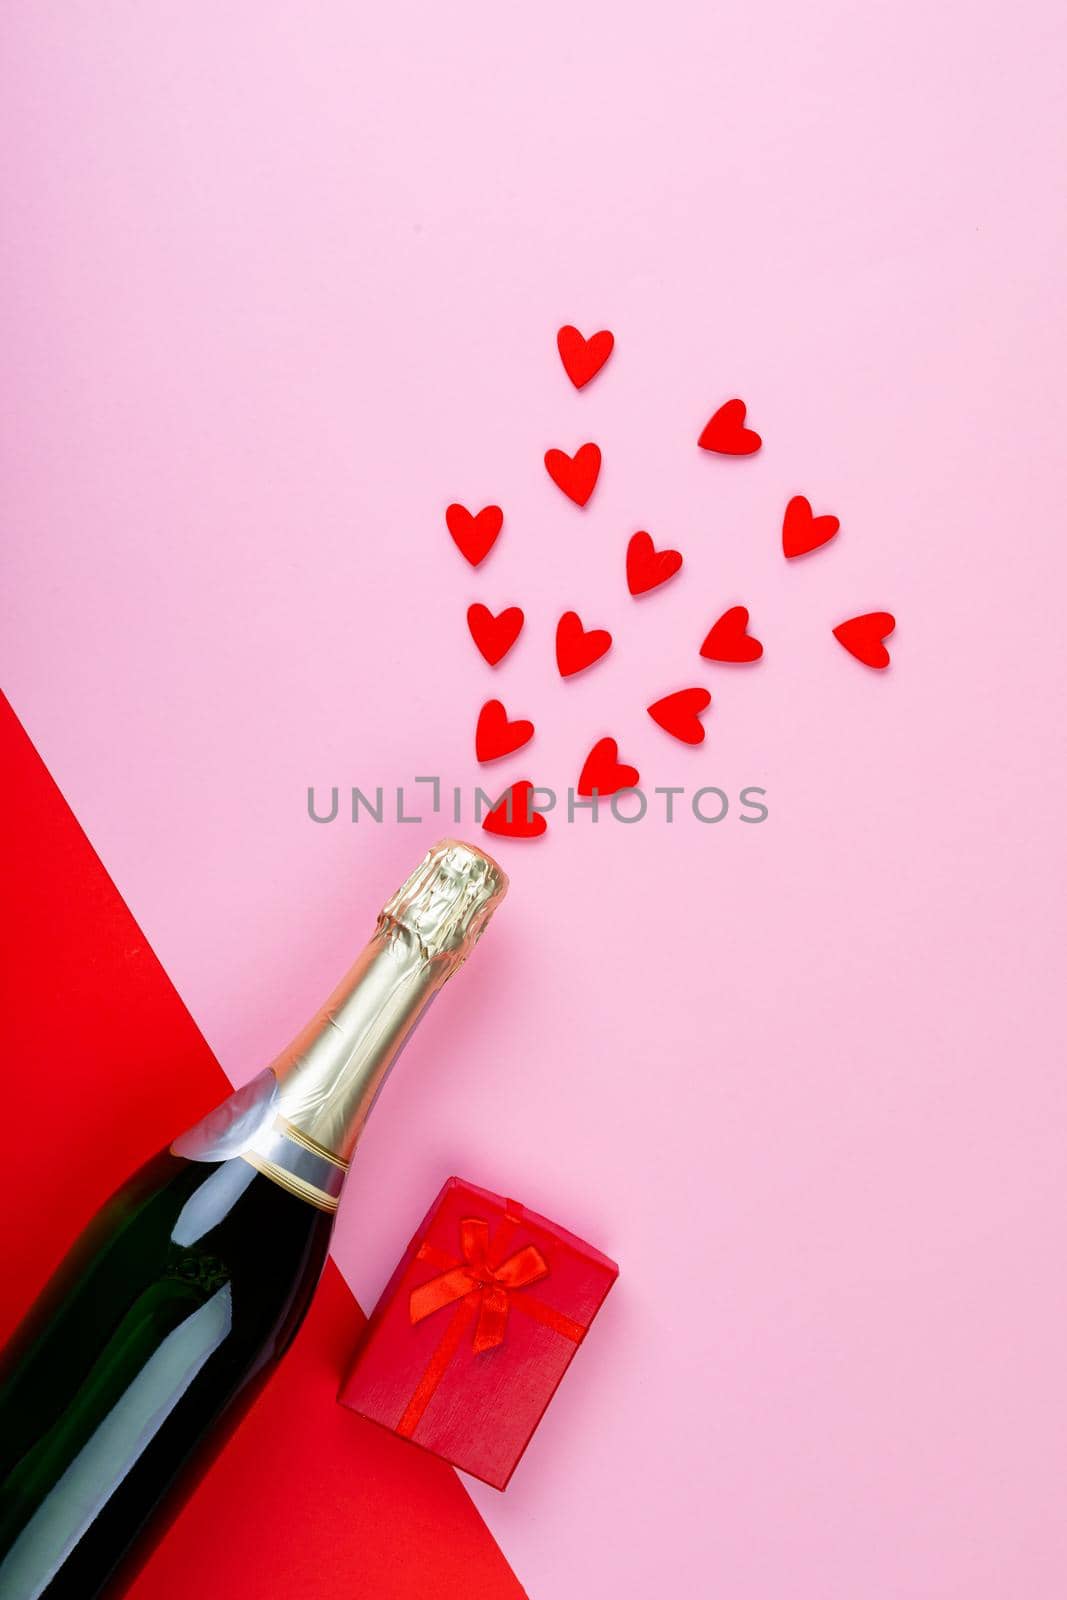 Champagne bottle splashing red heart shapes by gift box on pink background by Wavebreakmedia